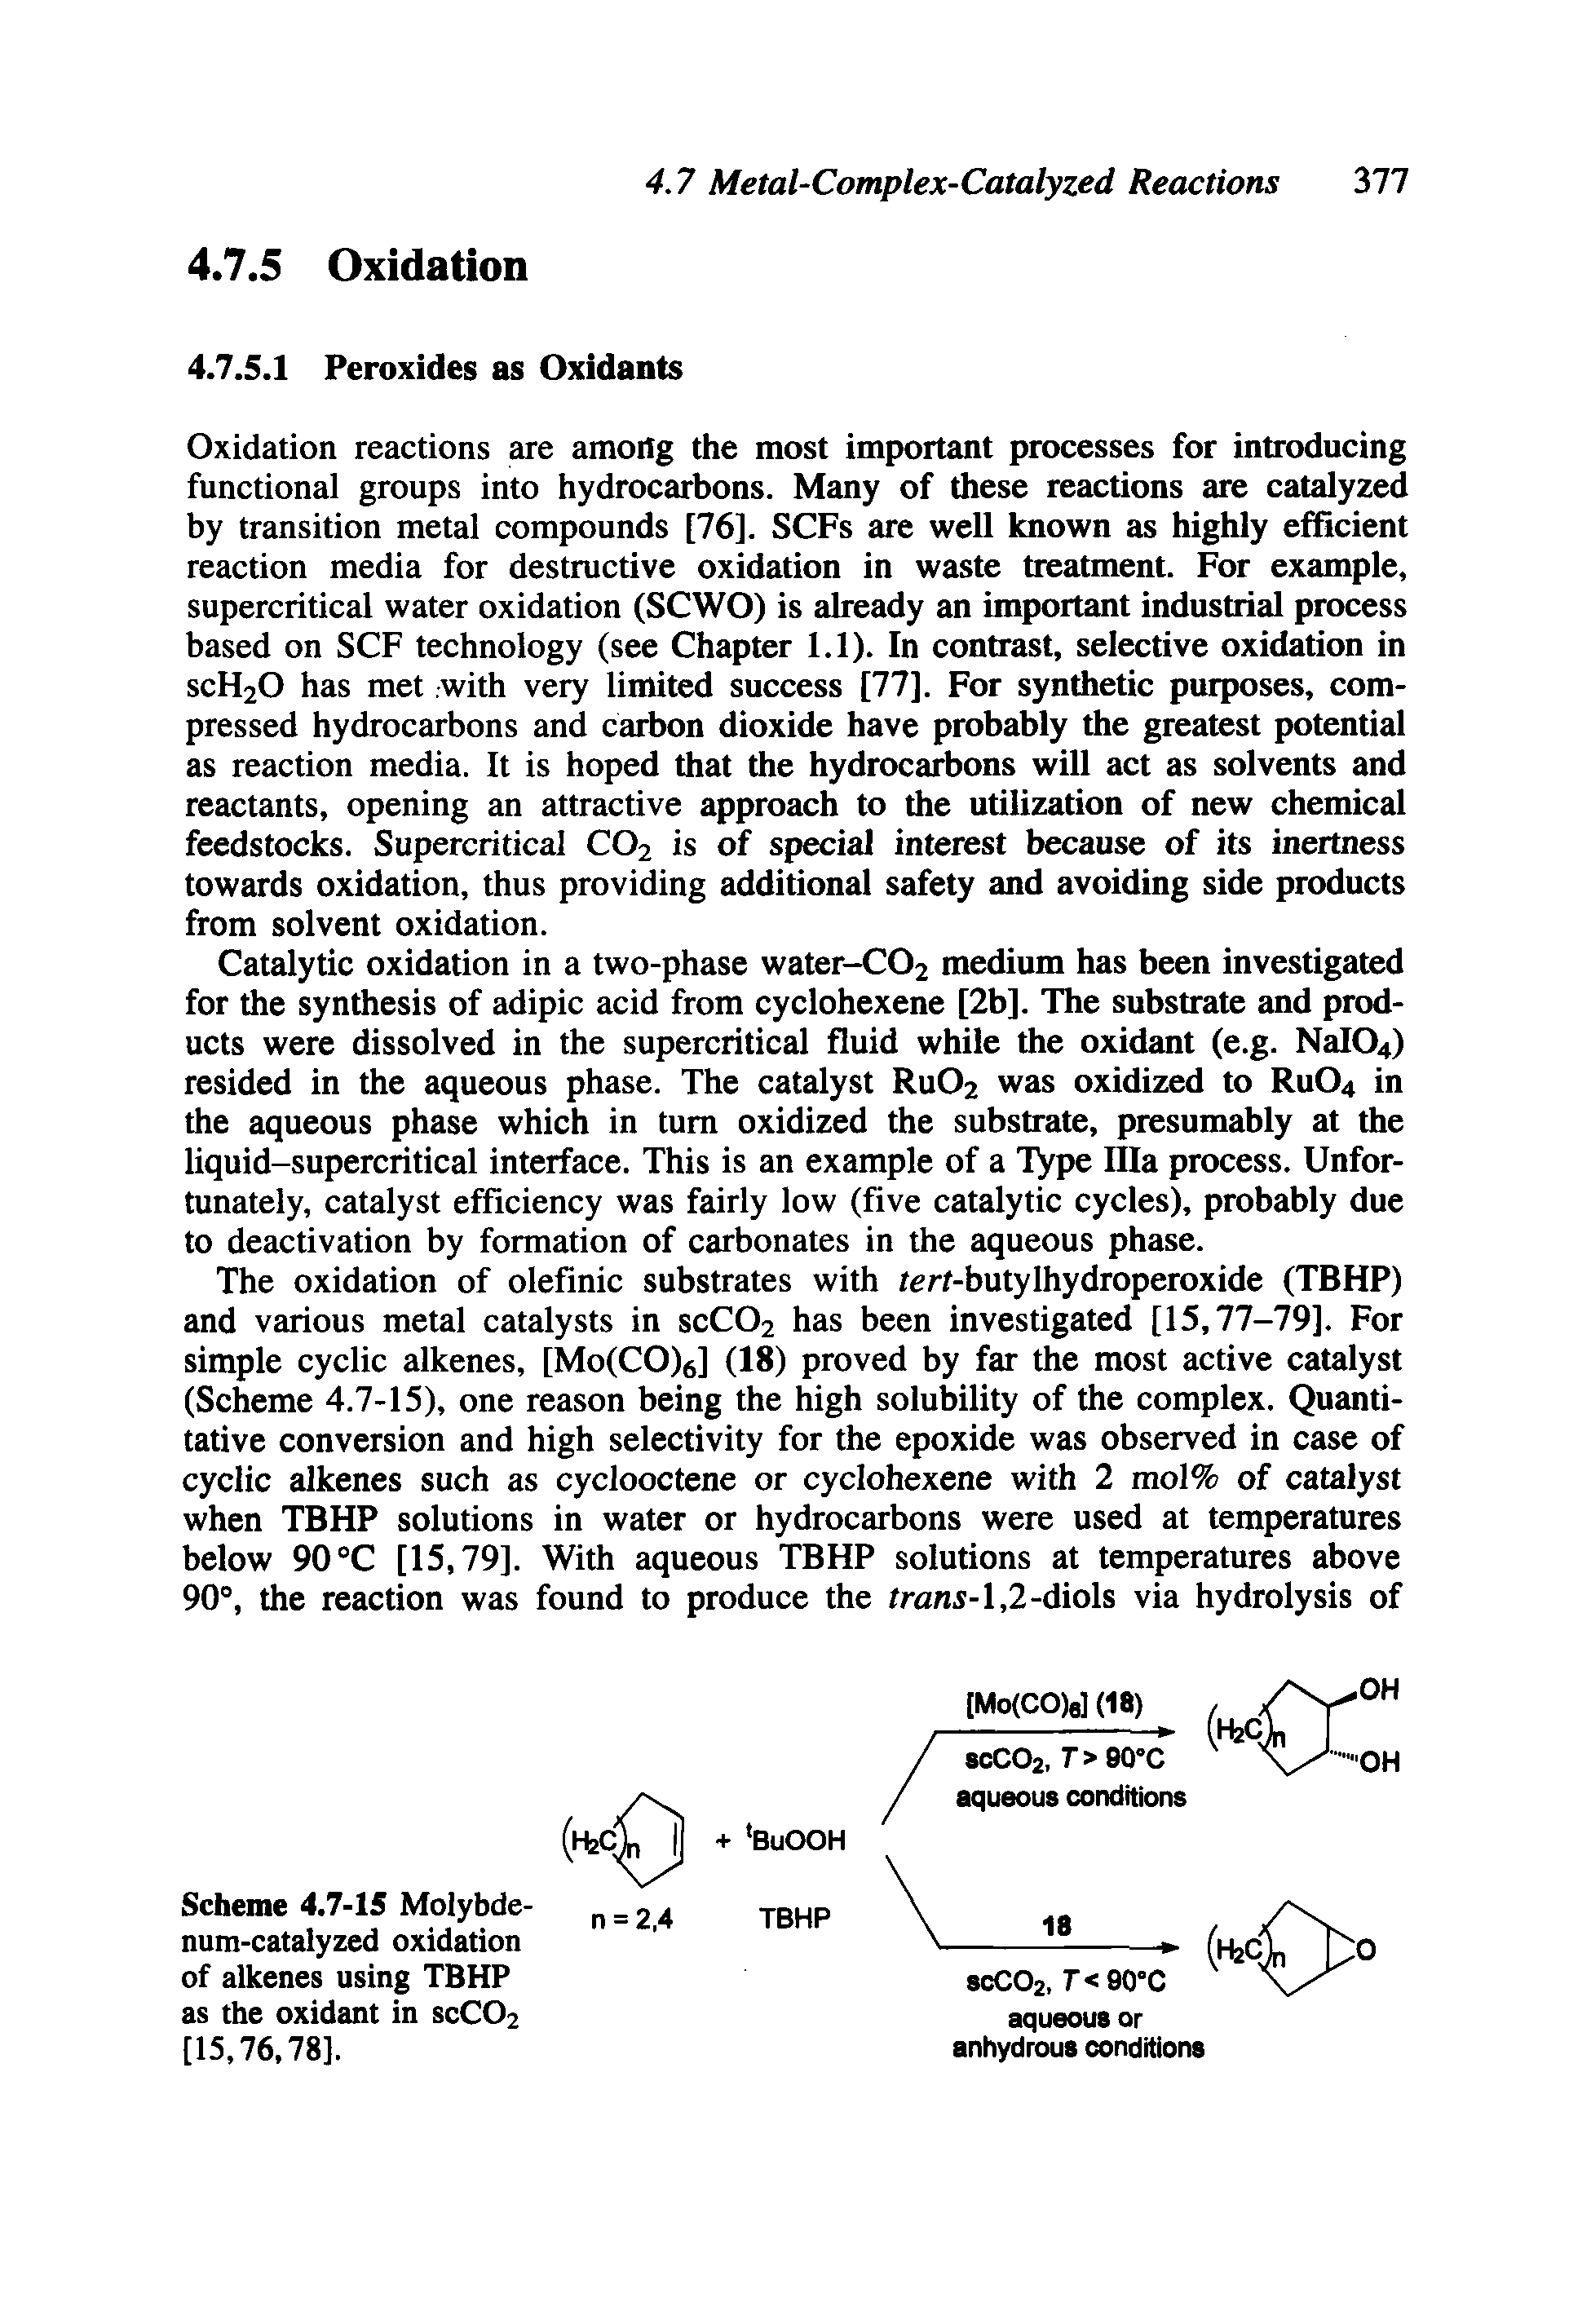 Scheme 4.7-15 Molybdenum-catalyzed oxidation of alkenes using TBHP as the oxidant in SCCO2 [15,76,78].